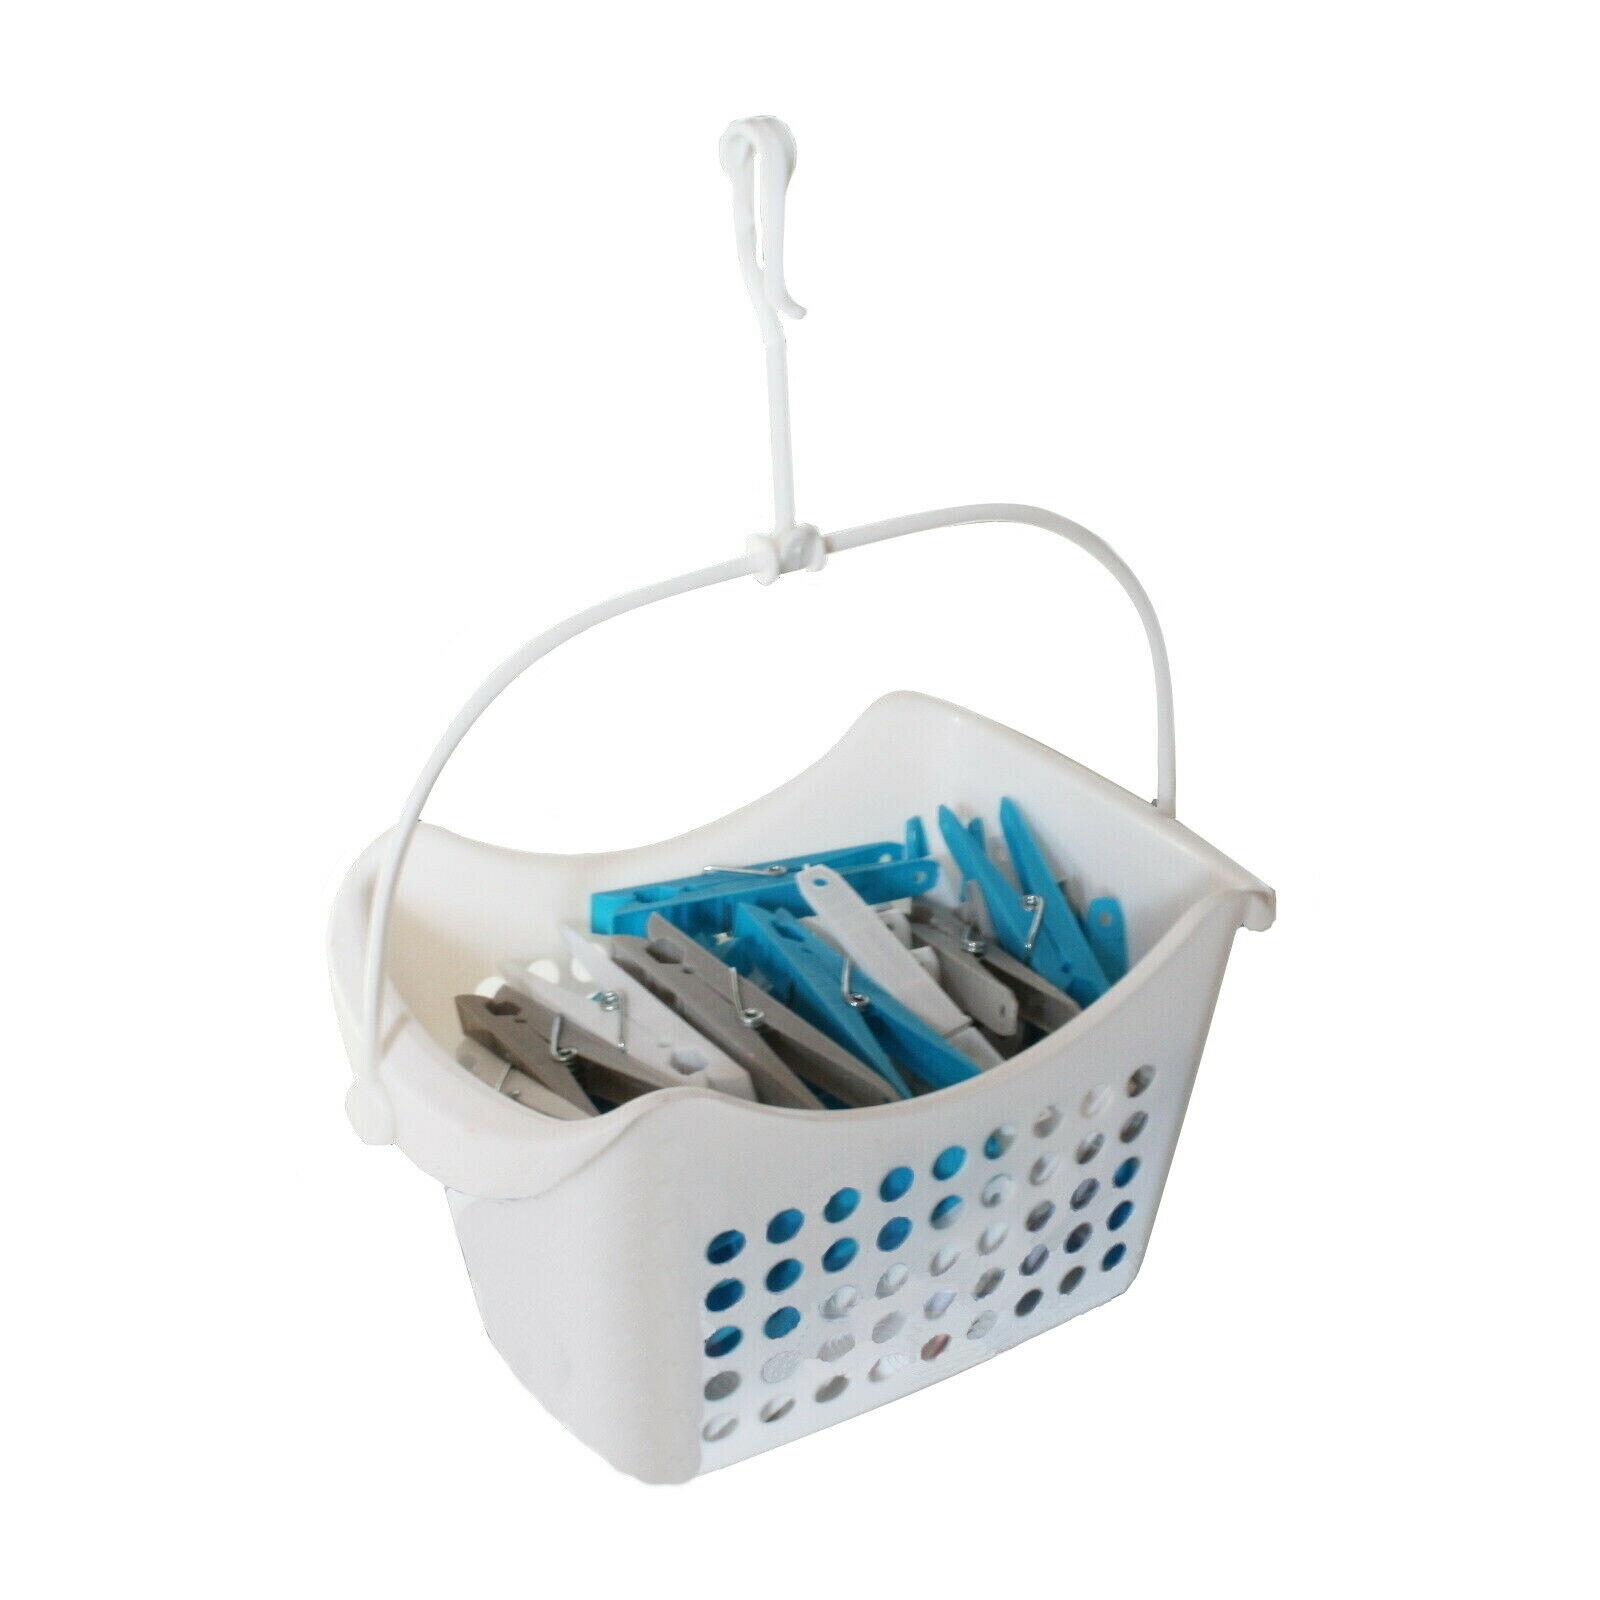 New 50 Clothes Airer Dryer Hangers Pegs With Peg Basket UK 